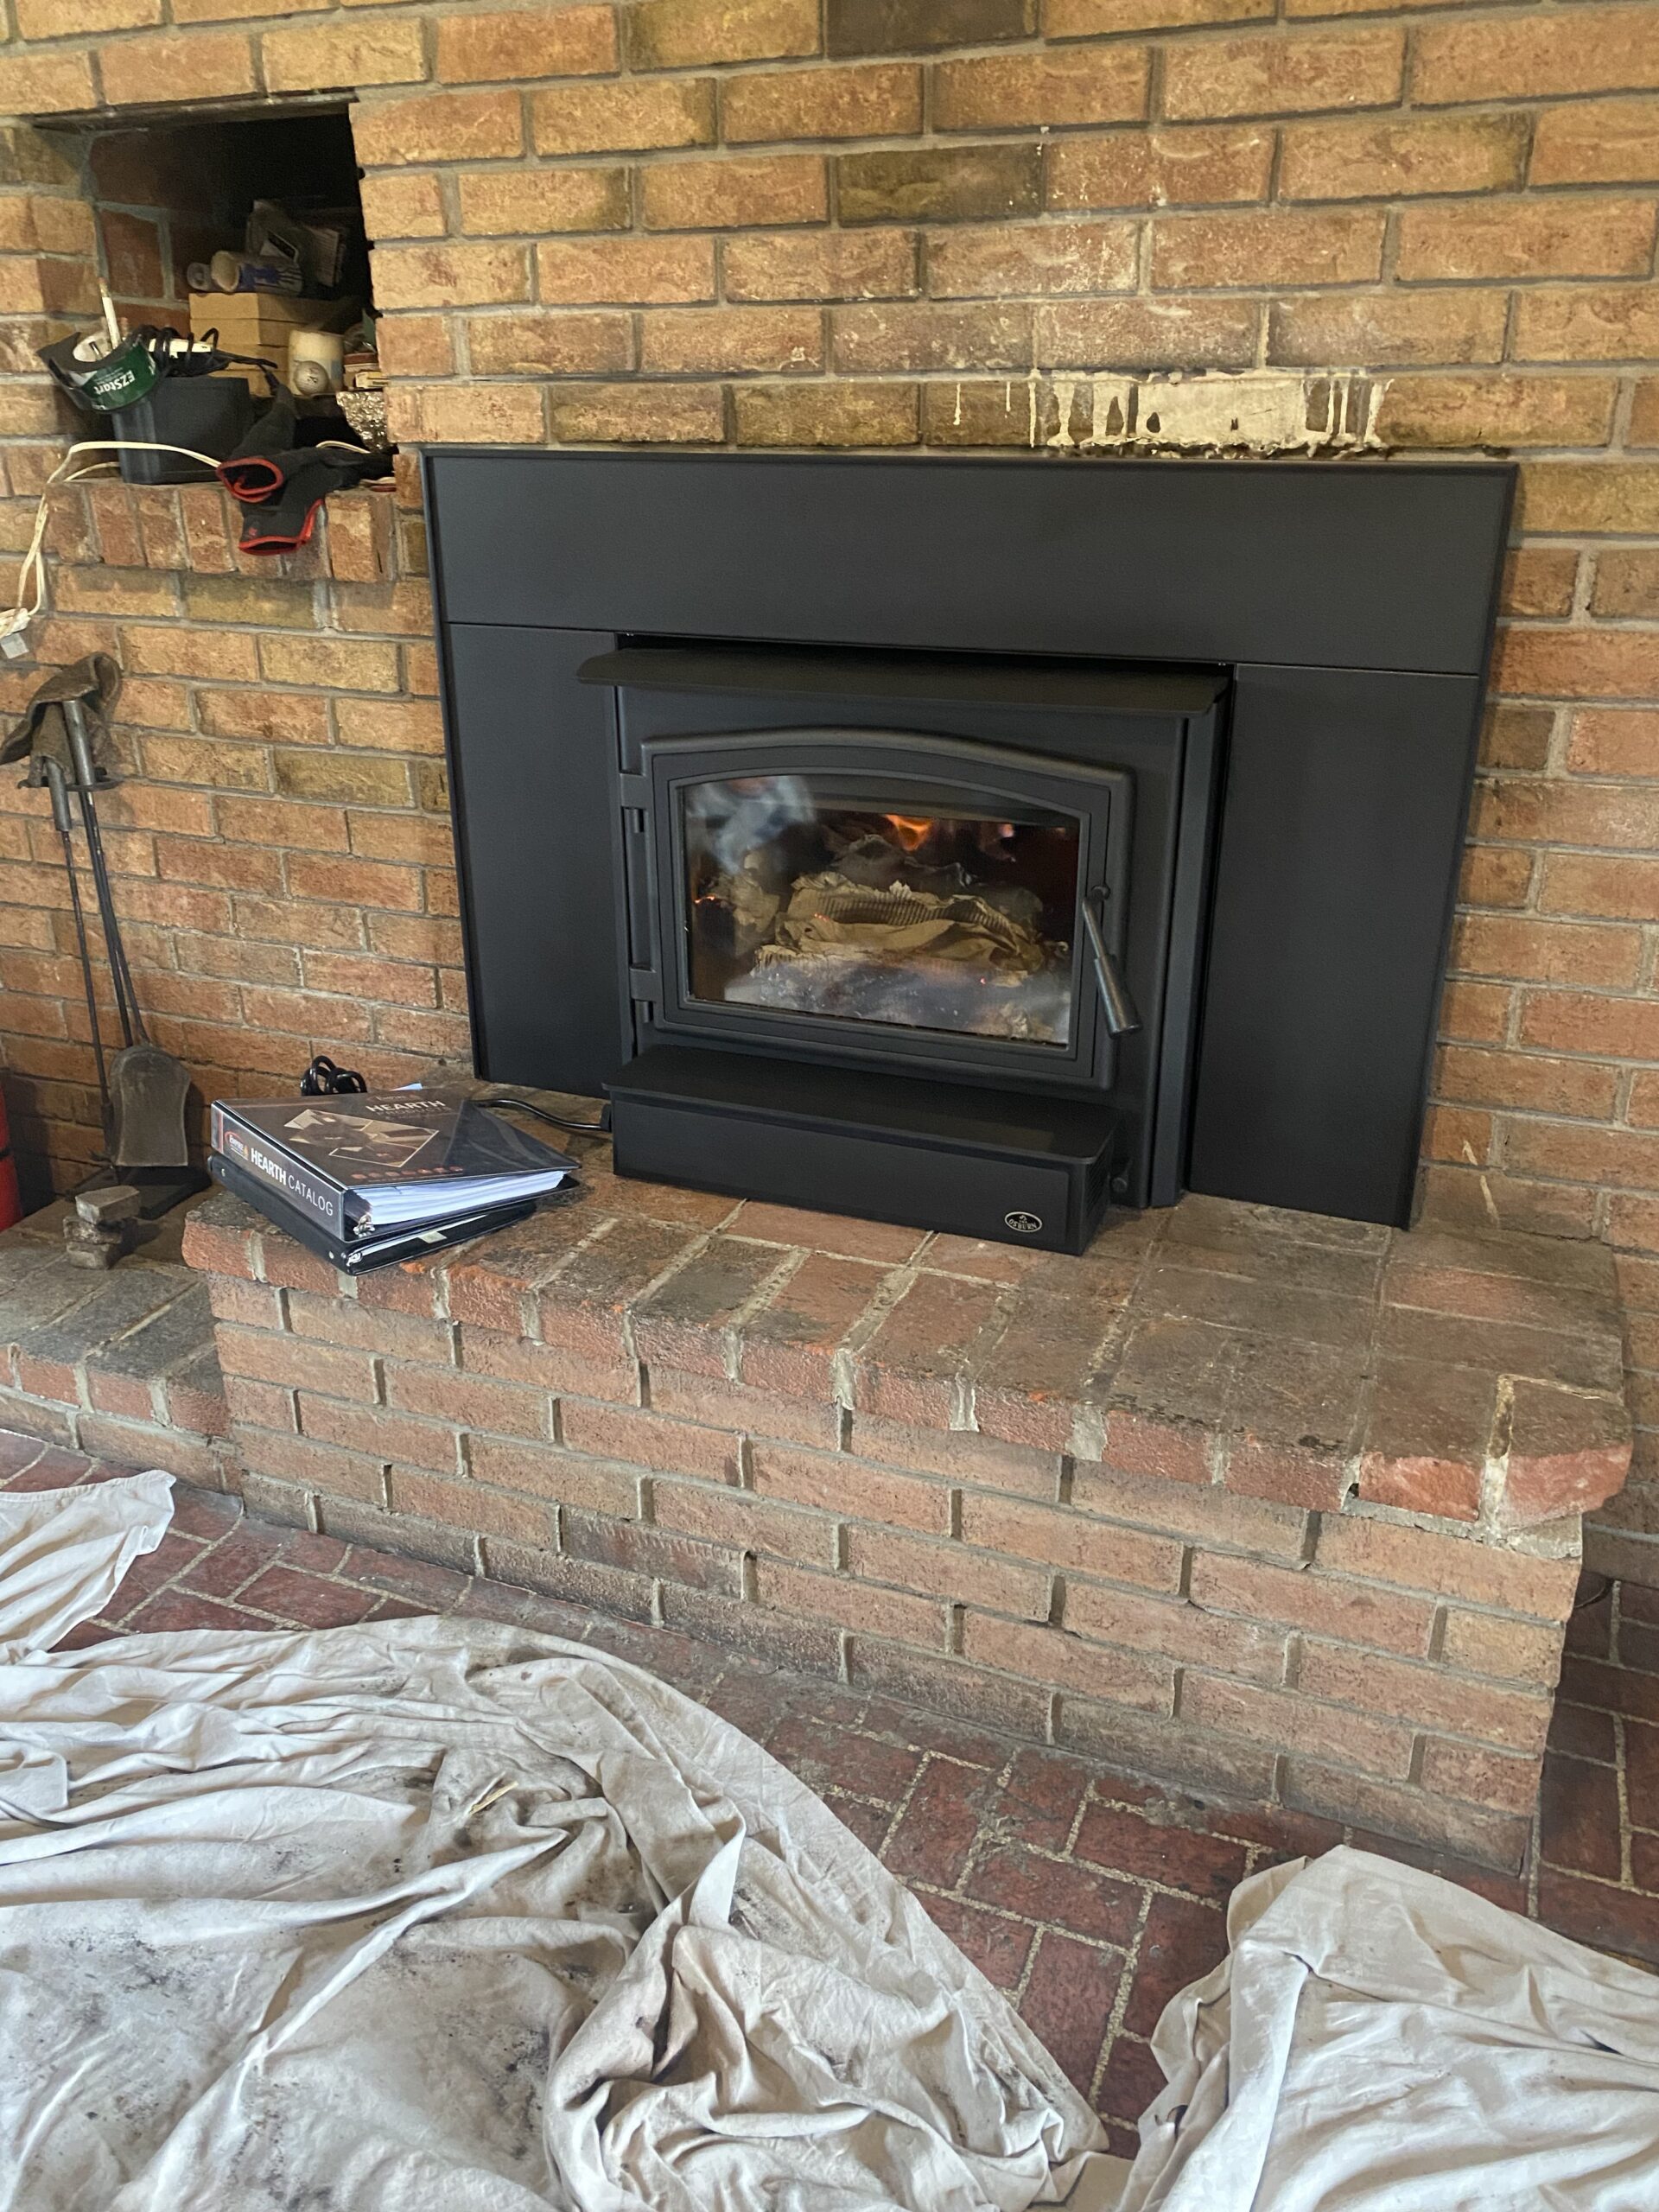 wood-burning fireplace insert being maintained